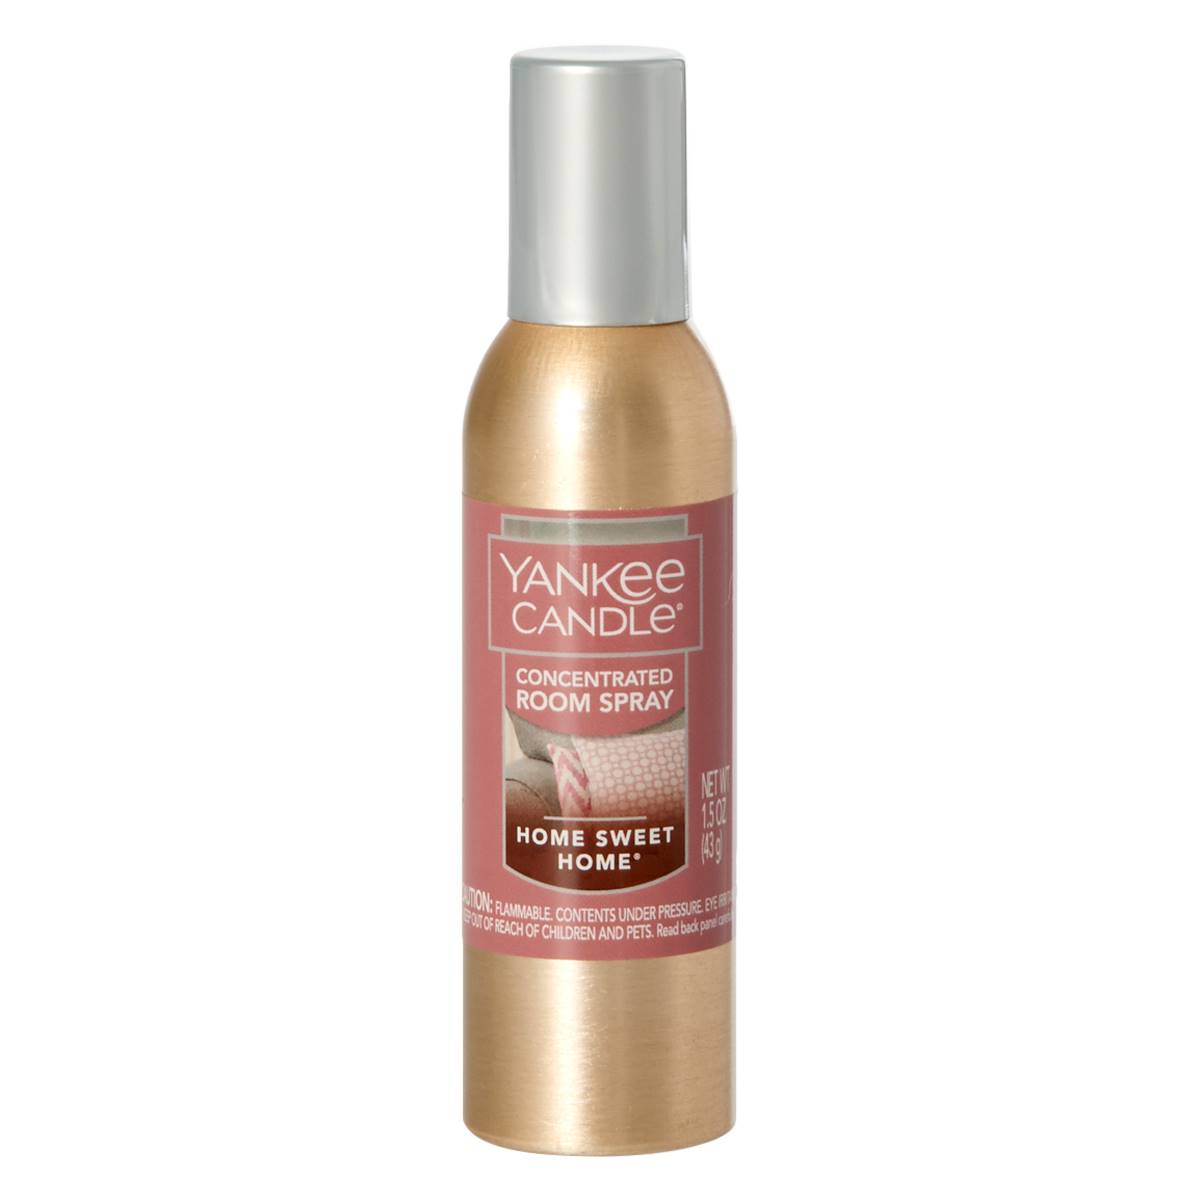 Yankee Candle(R) Home Sweet Home 1.5oz. Concentrated Room Spray